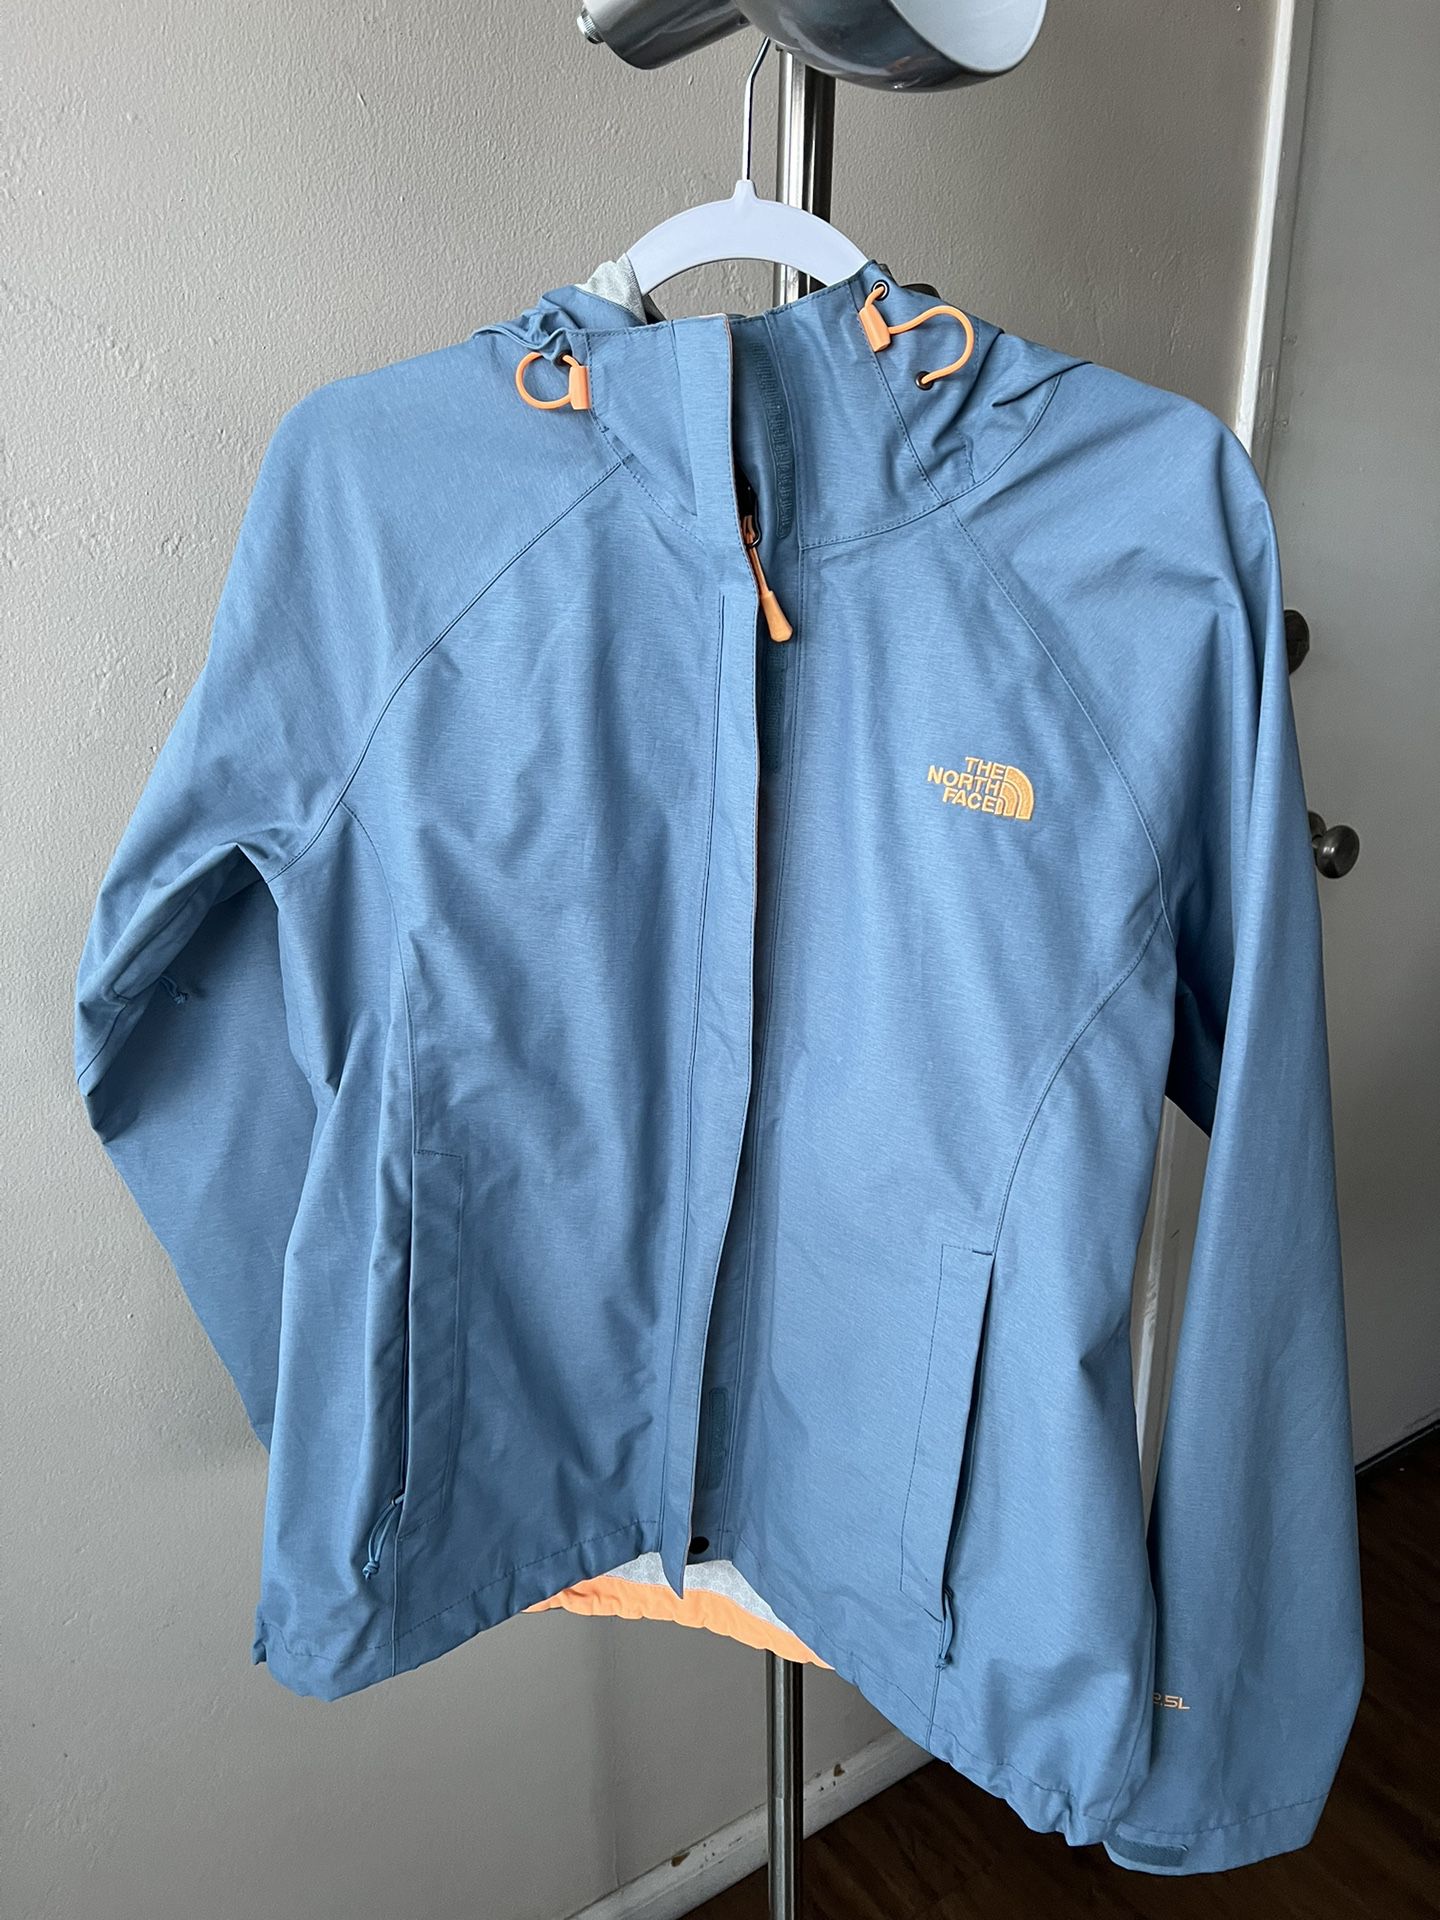 North Face Women’s Jacket 